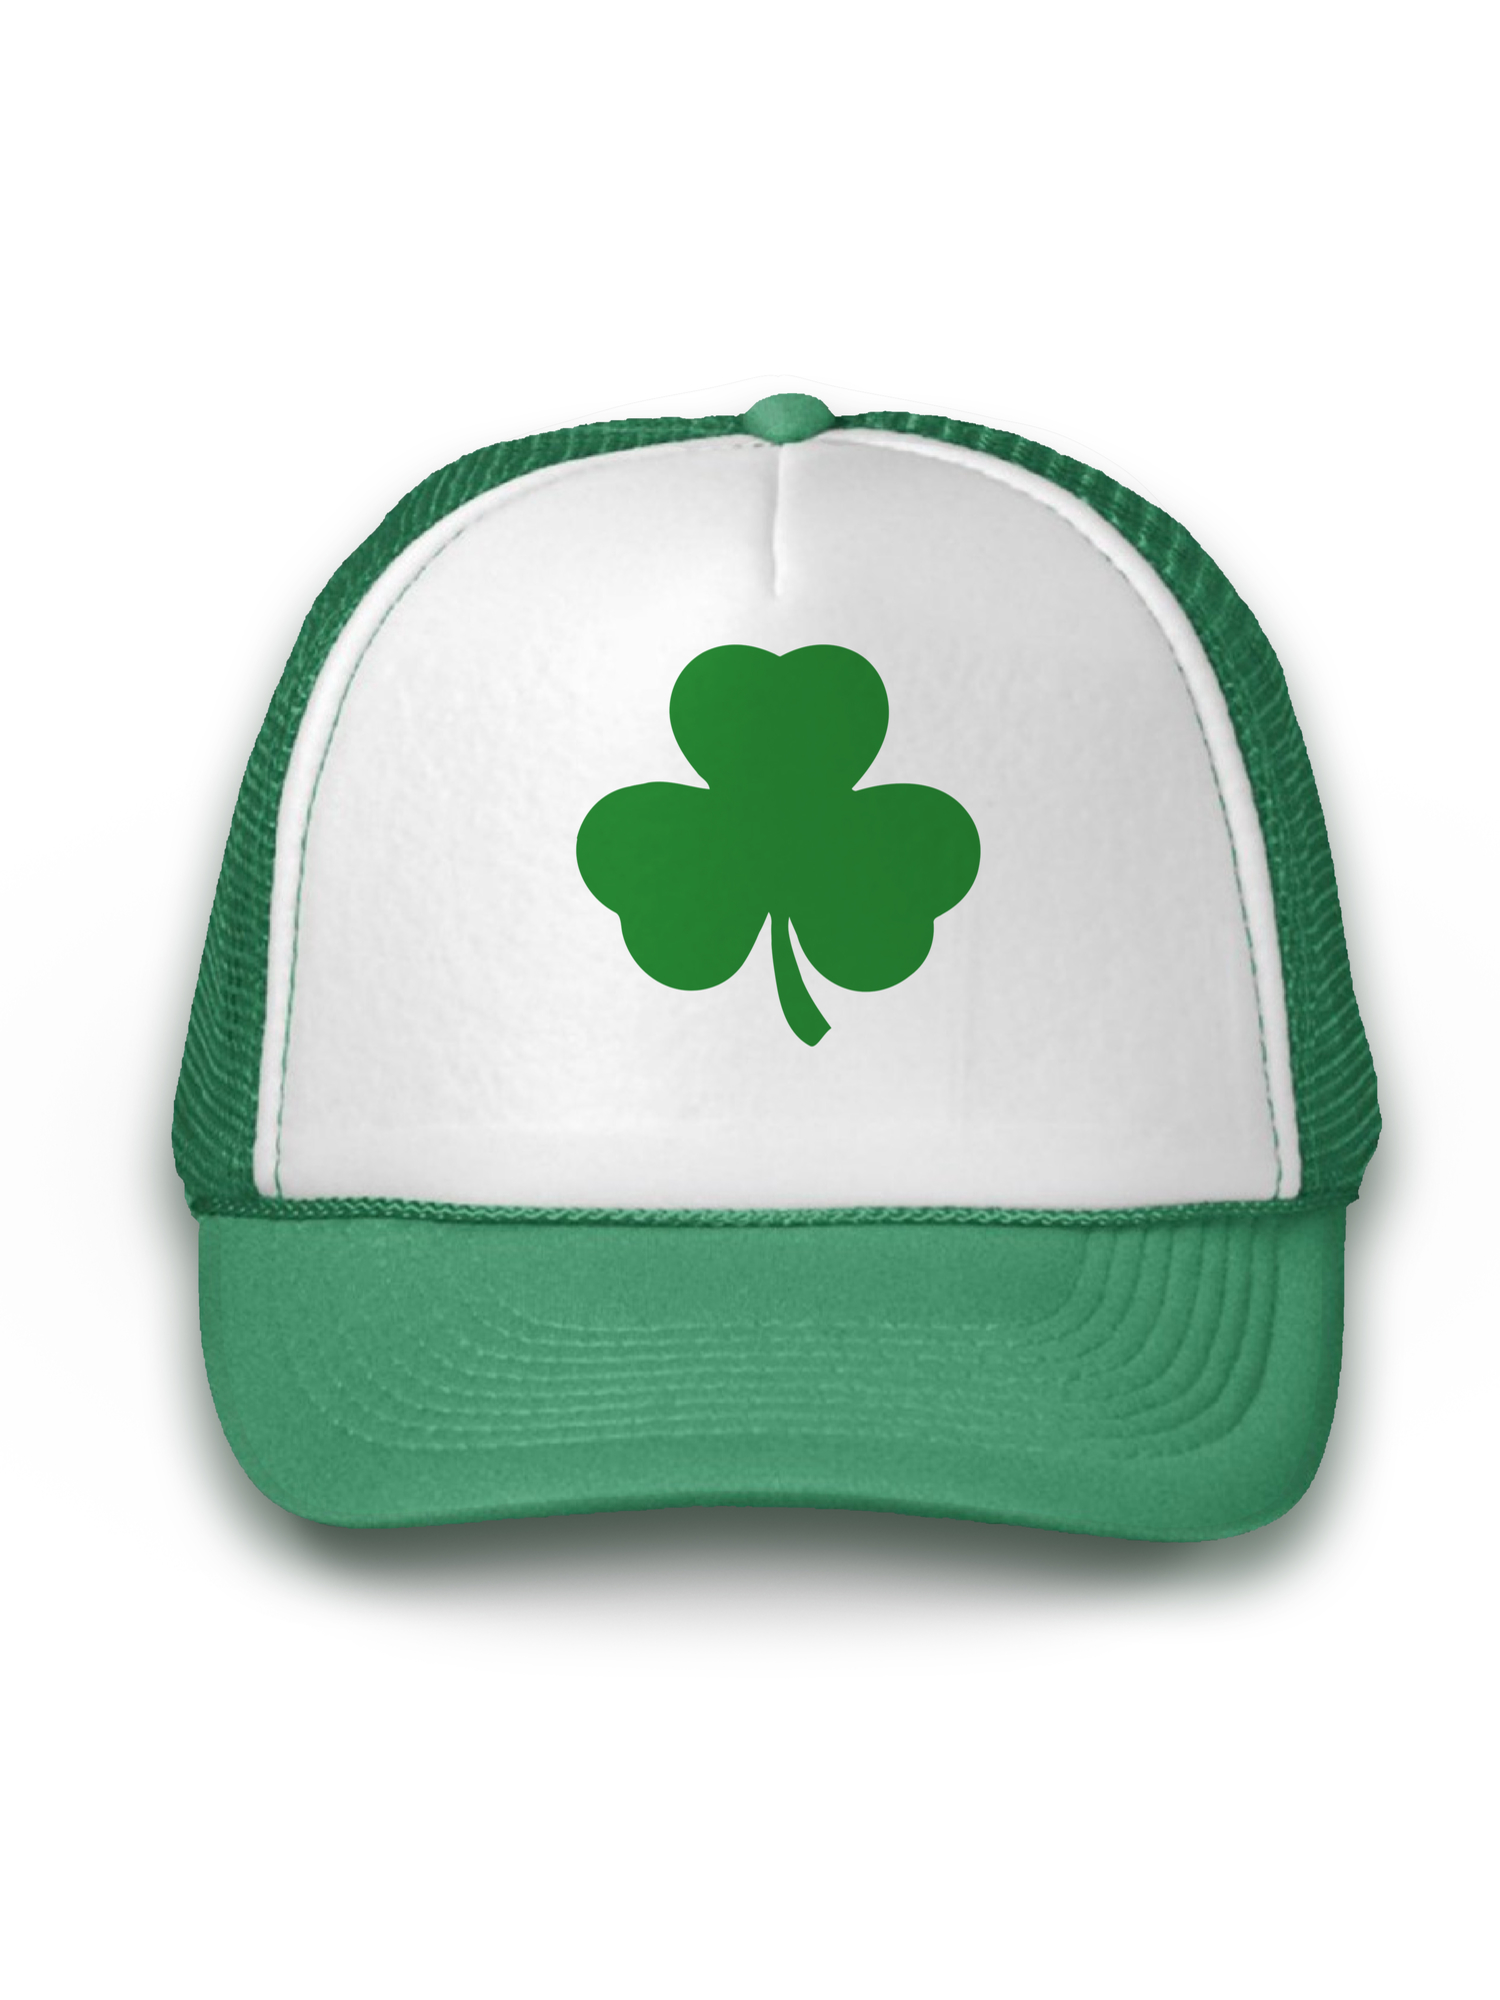 Awkward Styles St. Paddy's Day Trucker Hats for St. Patrick's Day Celebration Vintage Style Retro Mesh Cap Gift St. Patrick Top Hat Green Hat Gift for Him Gift for Her St. Patrick's Day Accessories - image 1 of 6